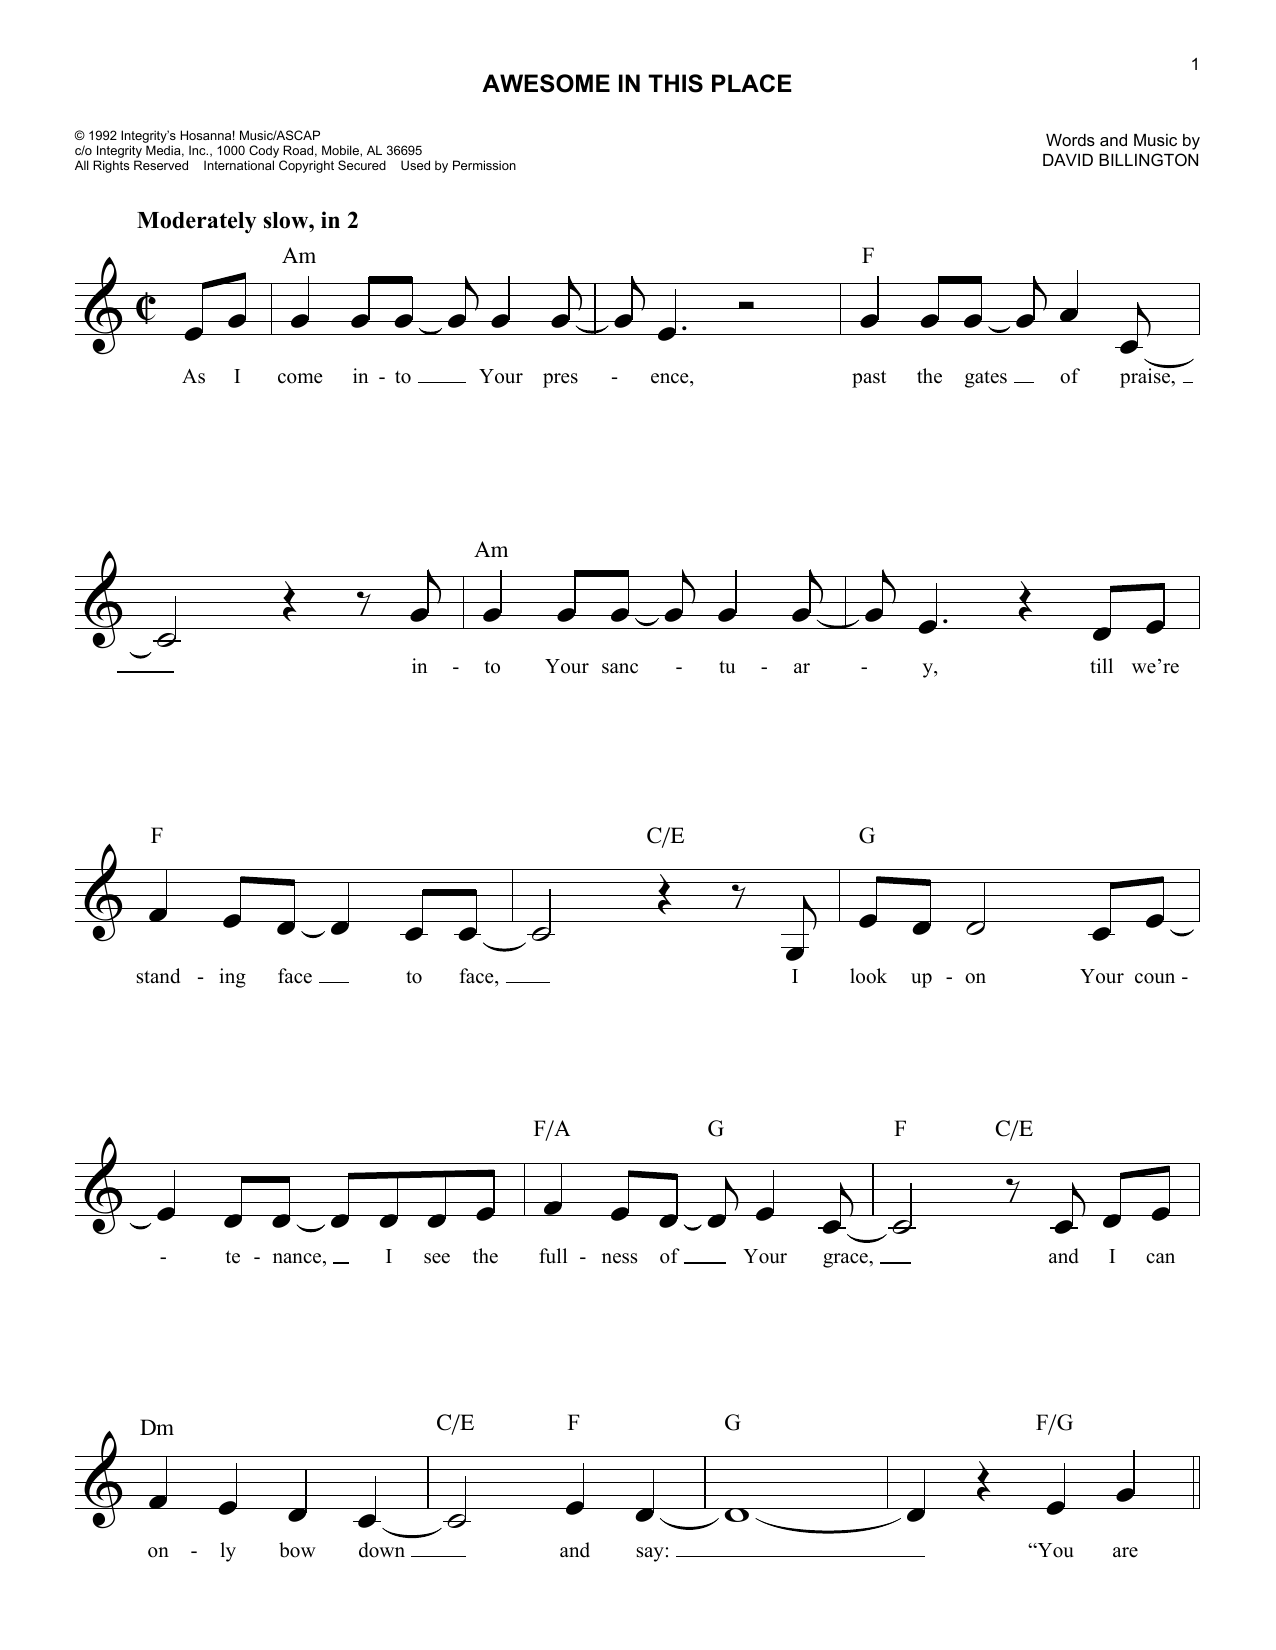 Download David Billington Awesome In This Place Sheet Music